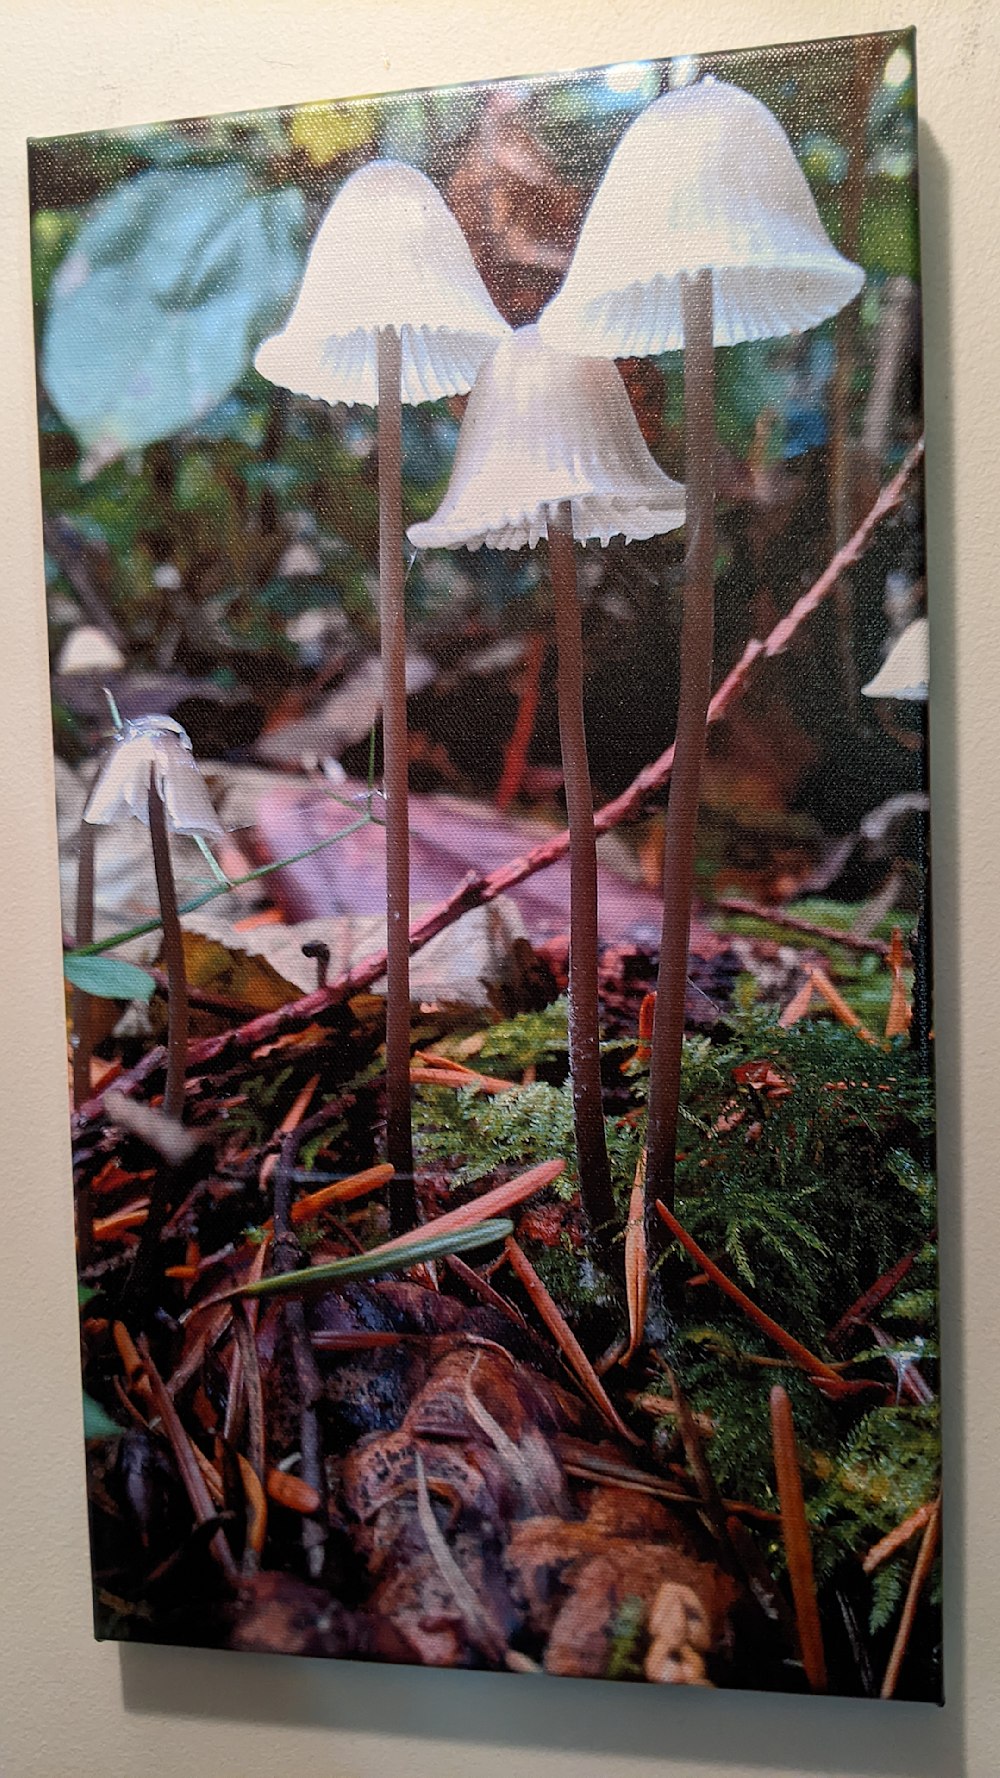 The Family, mushrooms on gallery wrapped canvas print